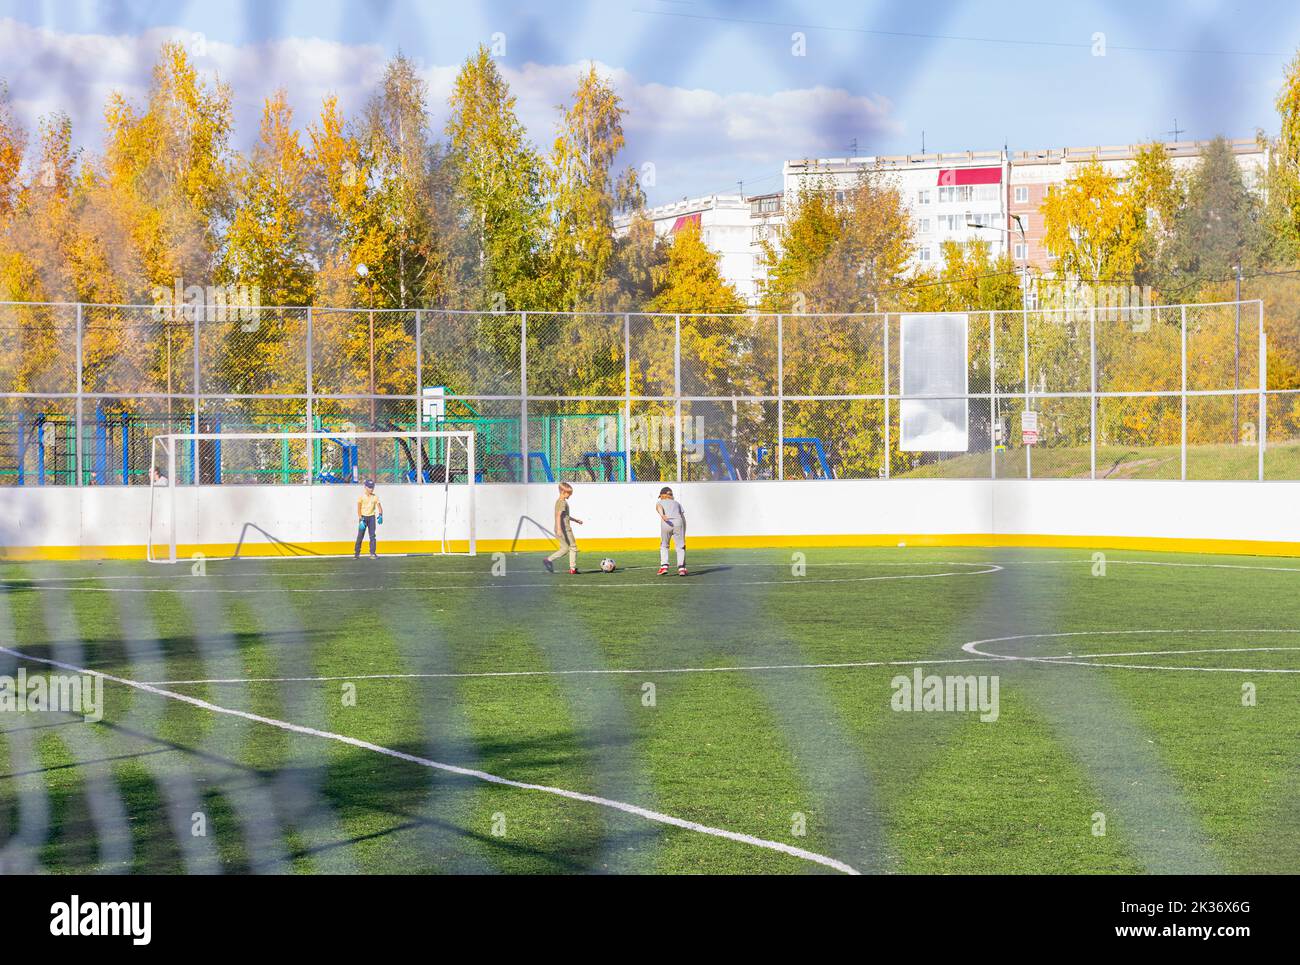 Young boys playing soccer game in golden autumn weather. Bright sun illuminates guys Tomsk Russia September 10, 2022.Blurred gray mesh with blurry boy Stock Photo